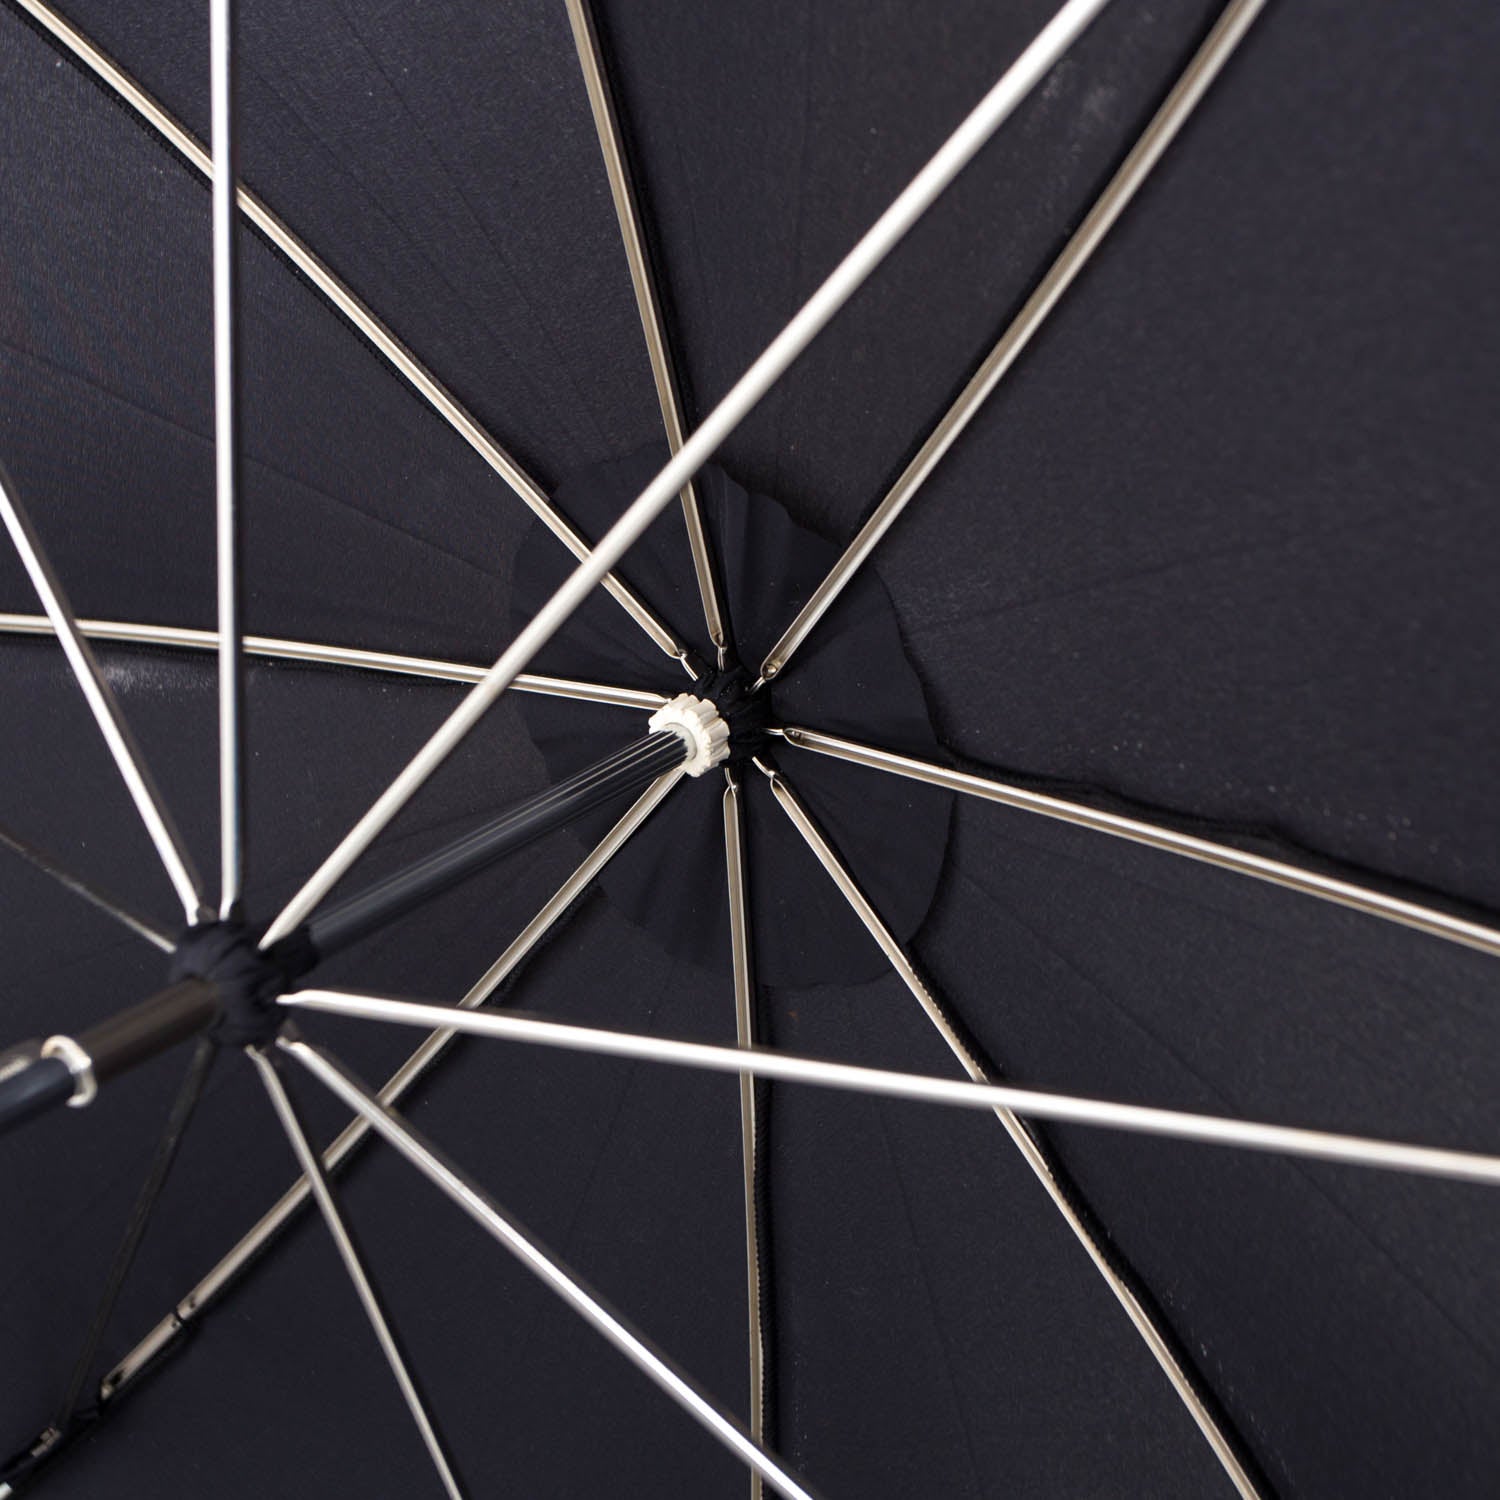 A close up of a Mario Talarico Black Canopy Umbrella with Dog Horn Handle from KirbyAllison.com.